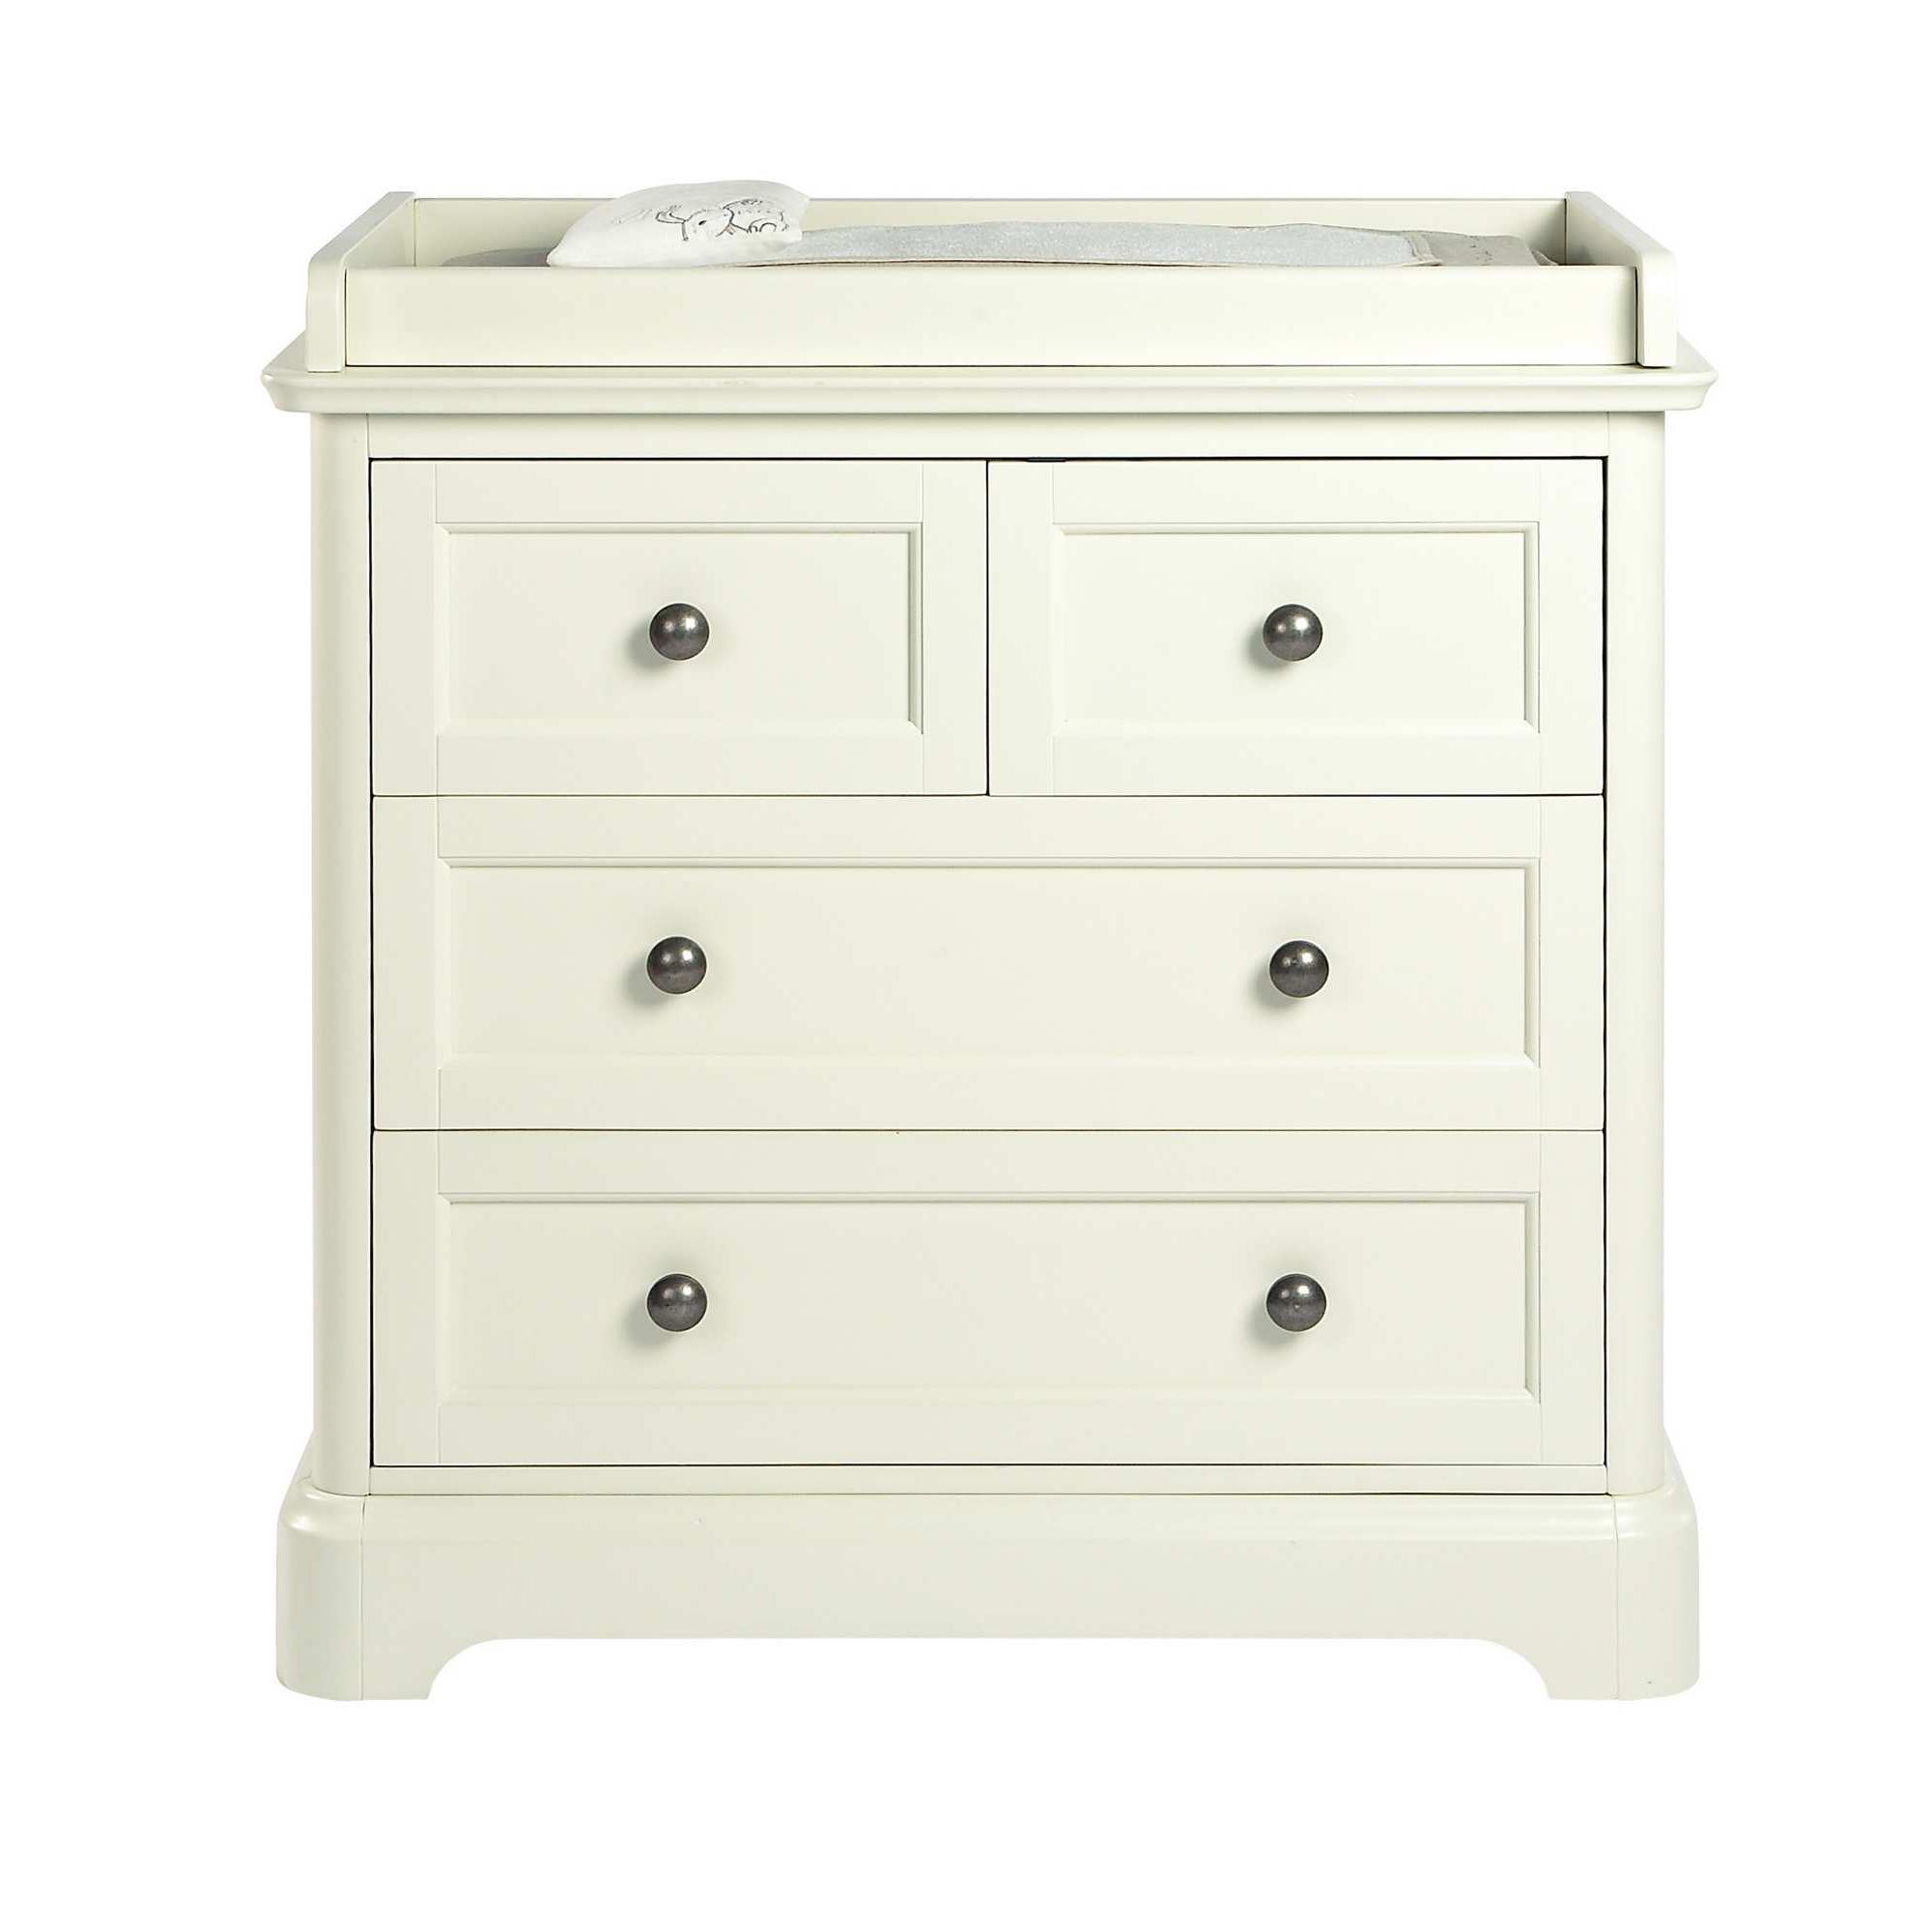 Mamas & Papas - Orchard Dresser with changer - White at Tesco Direct